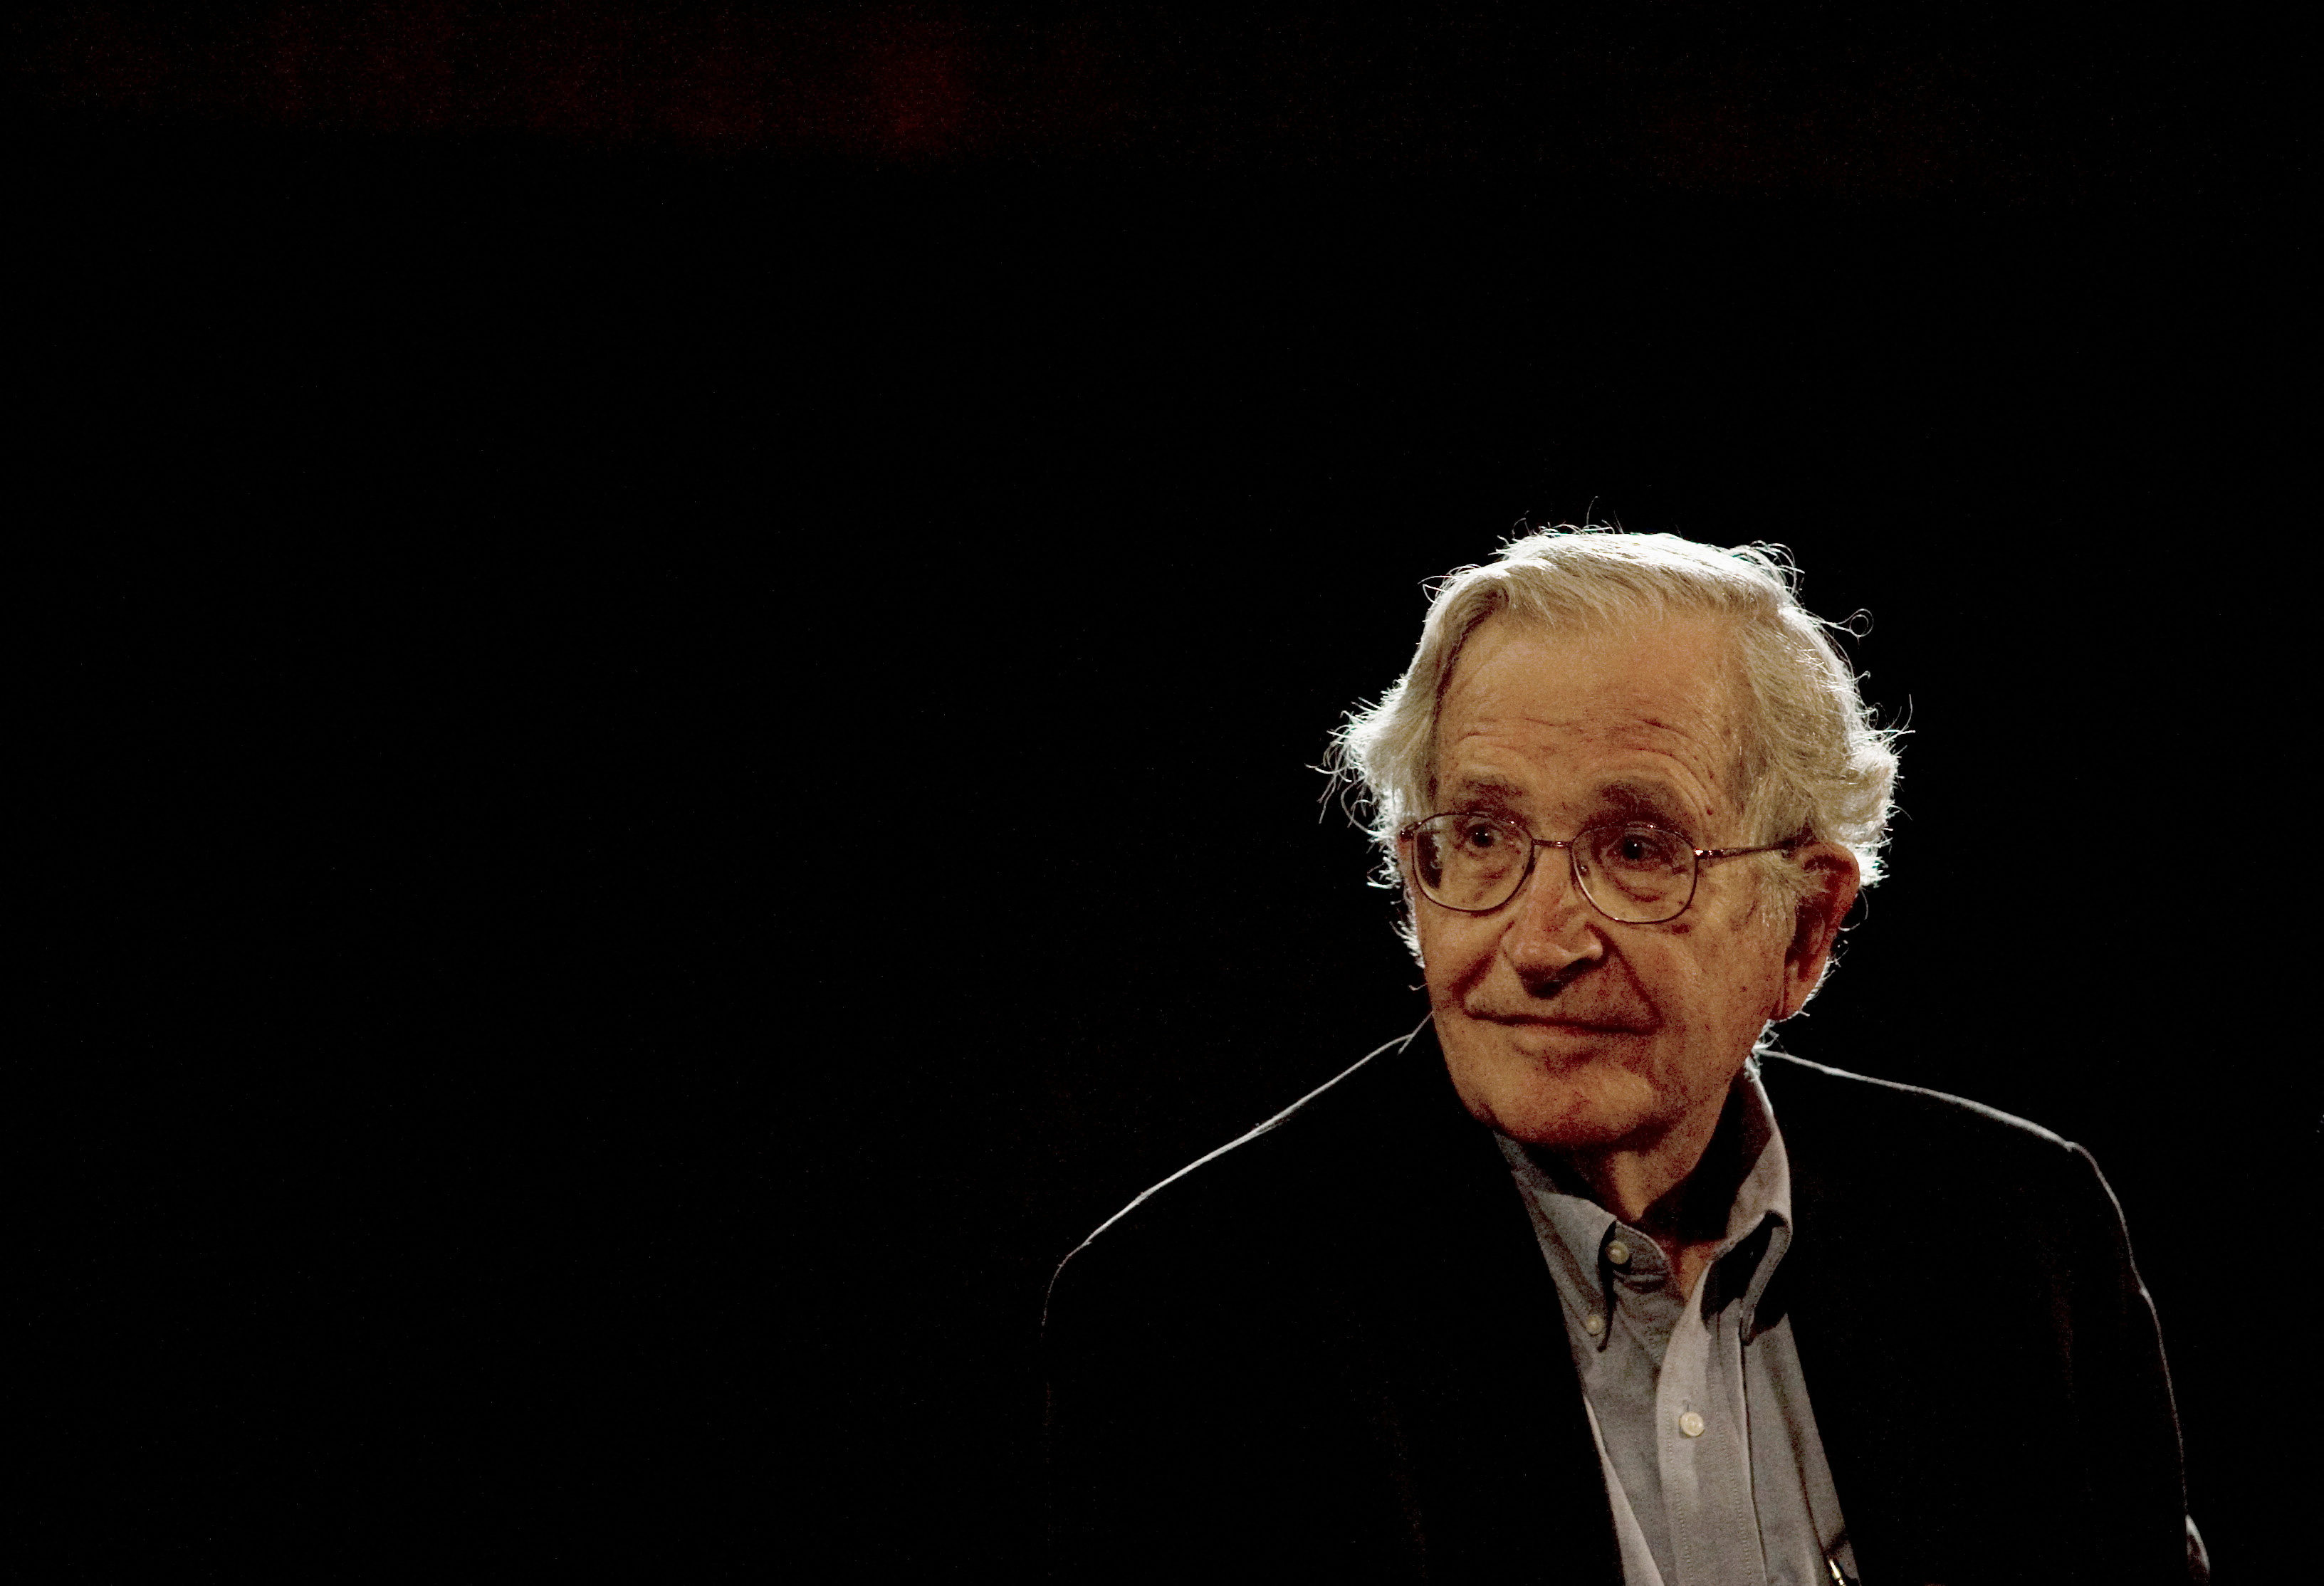 U.S. linguist and philosopher Noam Chomsky pauses while addressing the audience at the National Autonomous University's Educational Investigation Institute (UNAM) in Mexico City